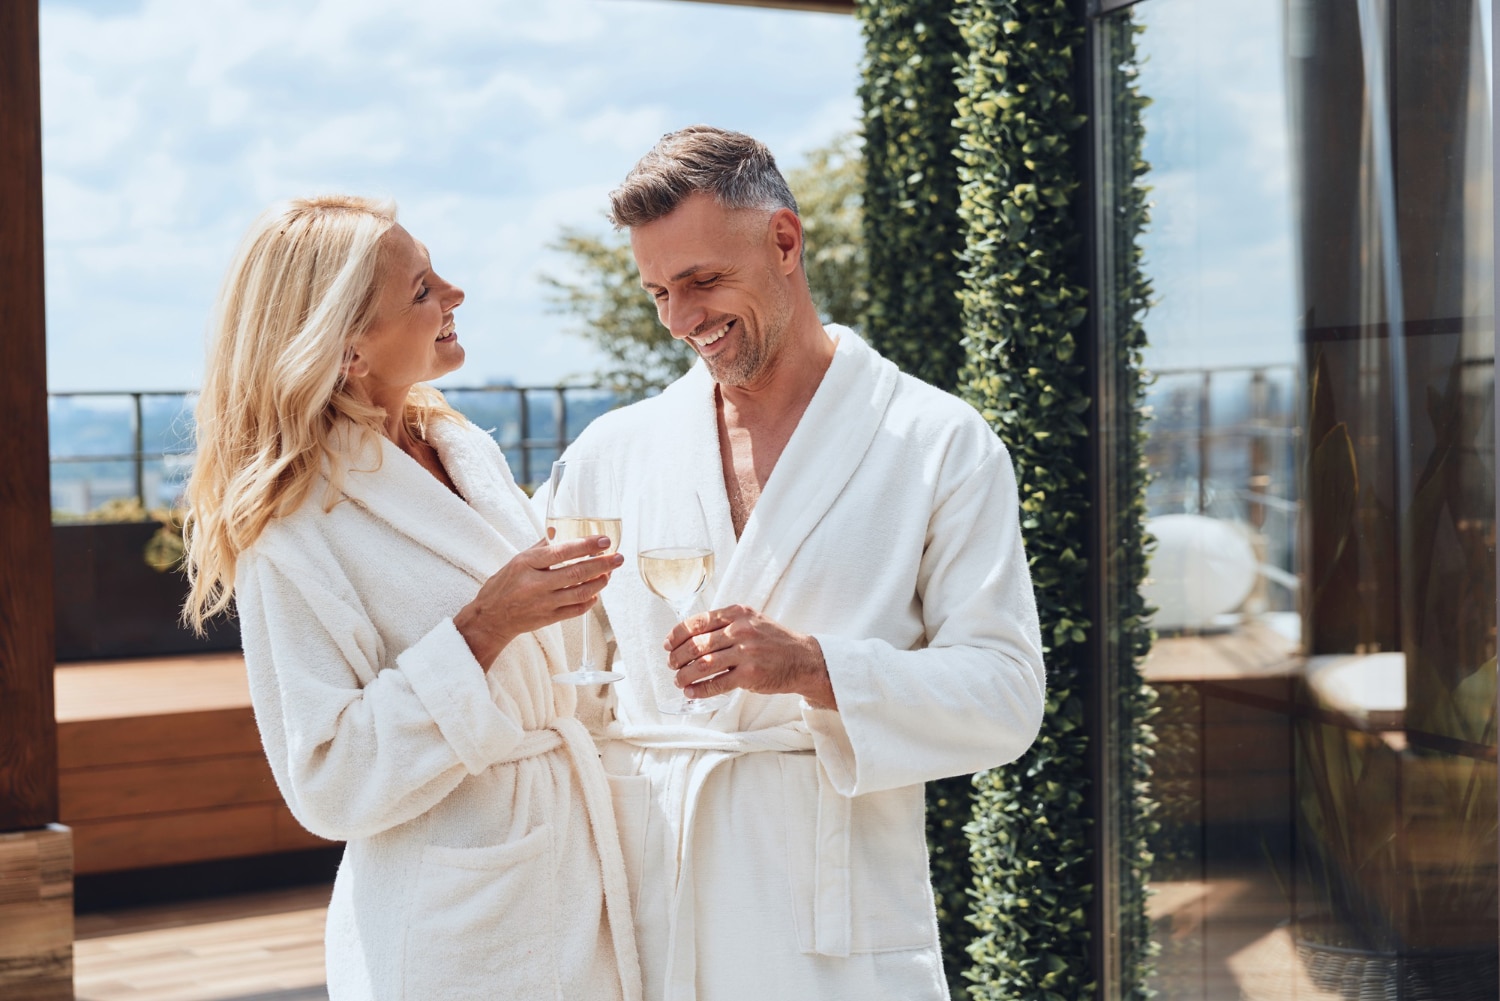 Couple Enjoying Champagne On Sunny Balcony In Robes